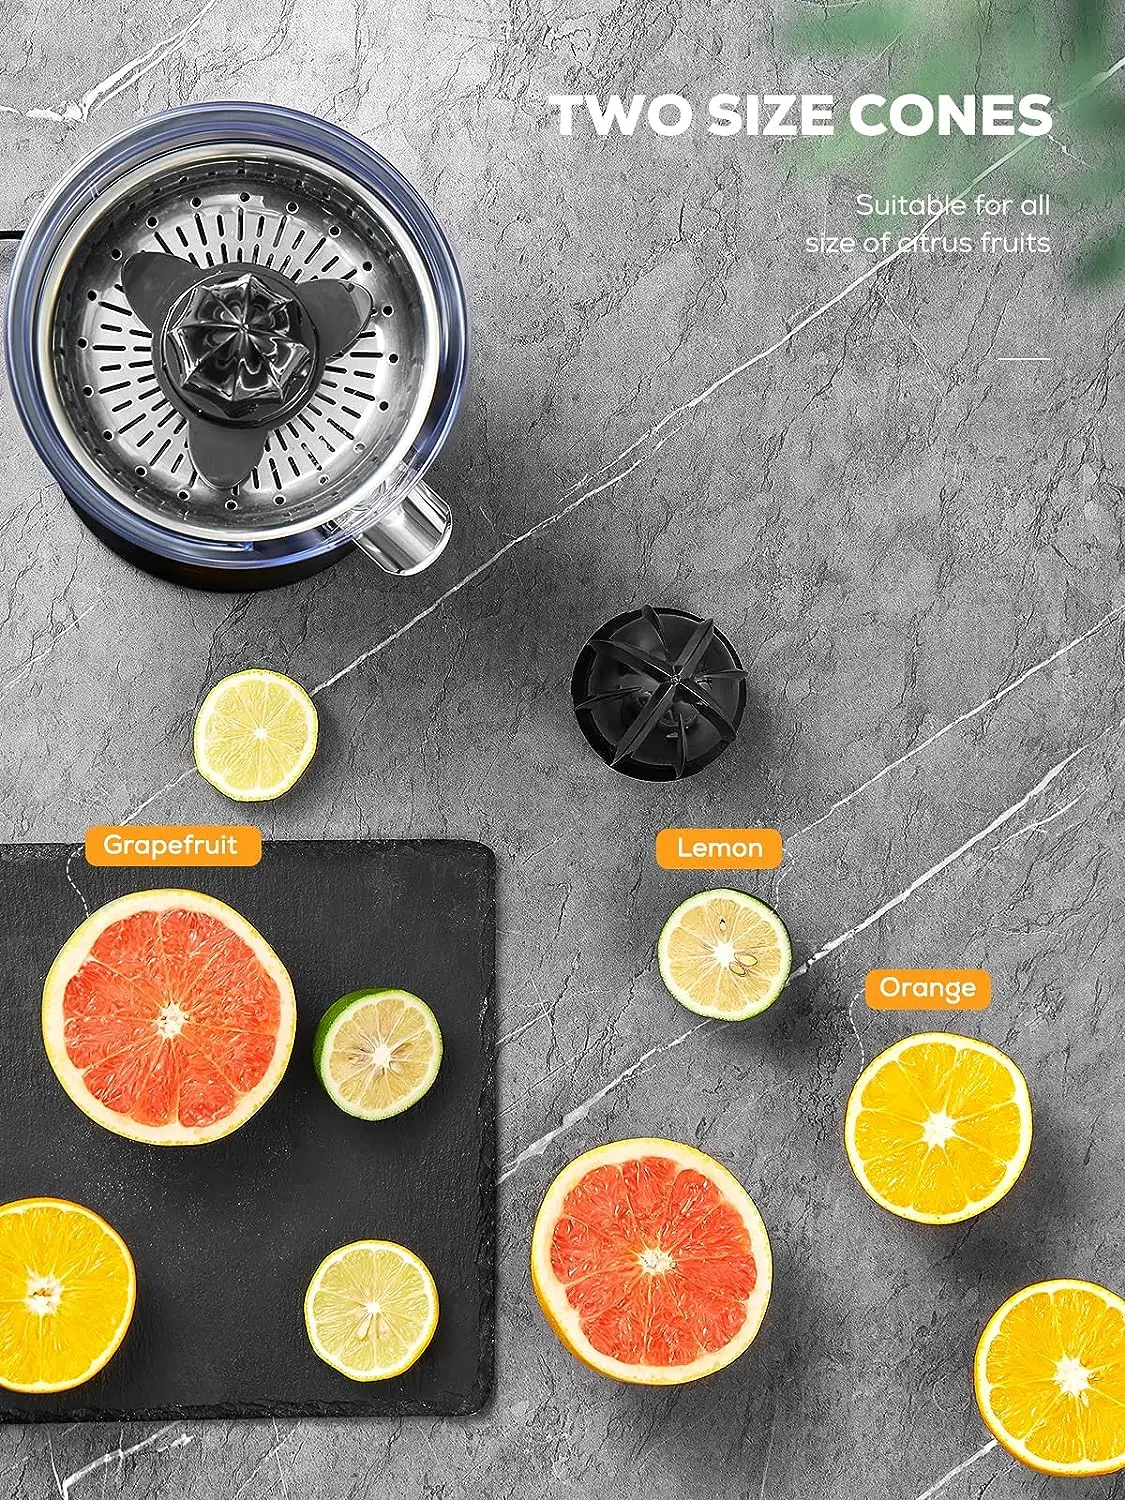 

Juicer Squeezer, Oranges Juicer with Rubber Handle and Two Size Cones, 160W Silent Motor Juice Squeezer for Orange, Lemon and Gr